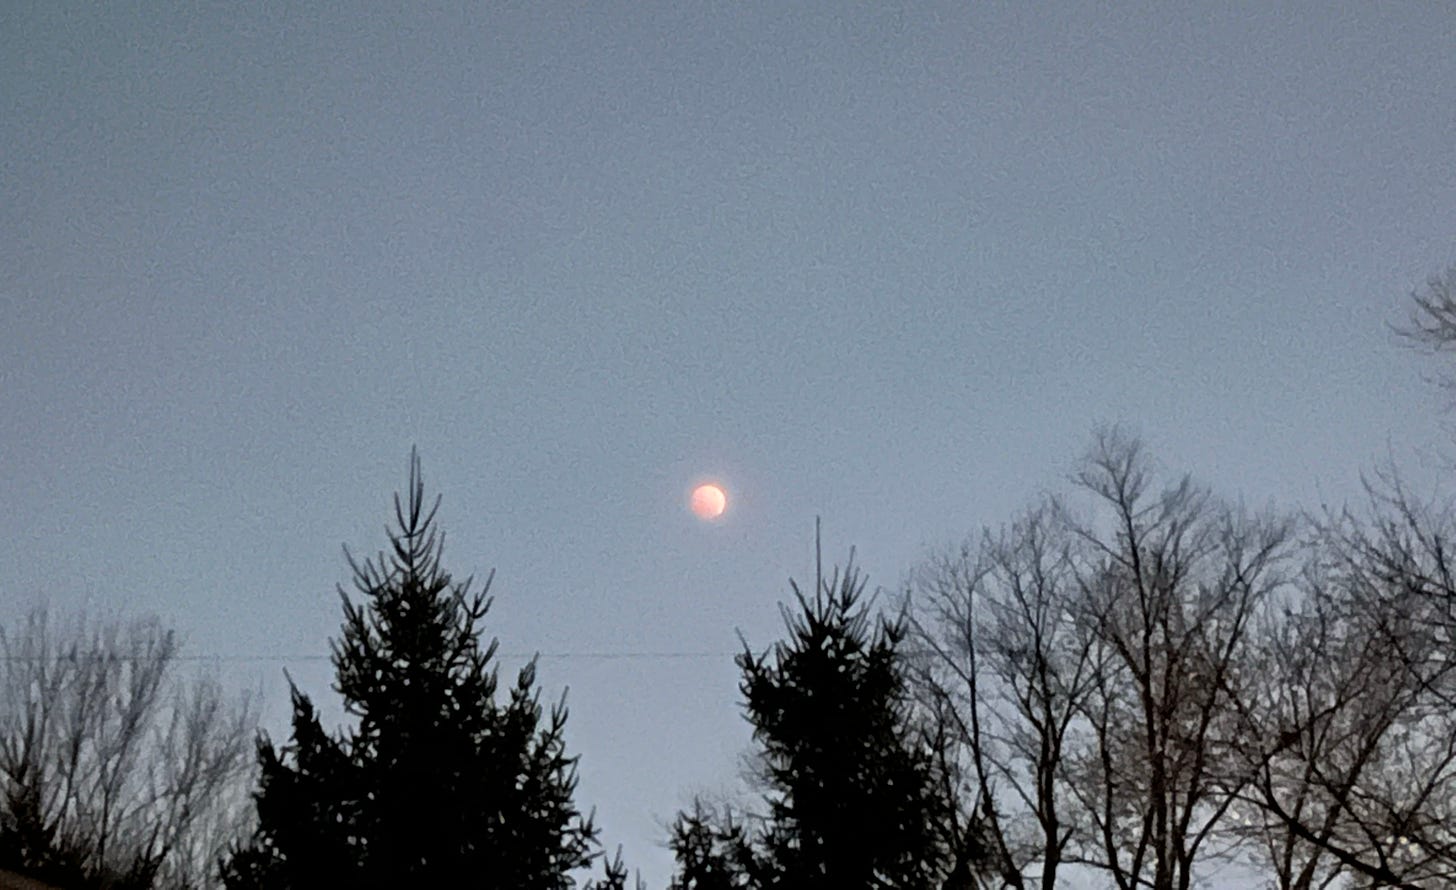 A lunar eclipse taking place above a group of pine and other trees